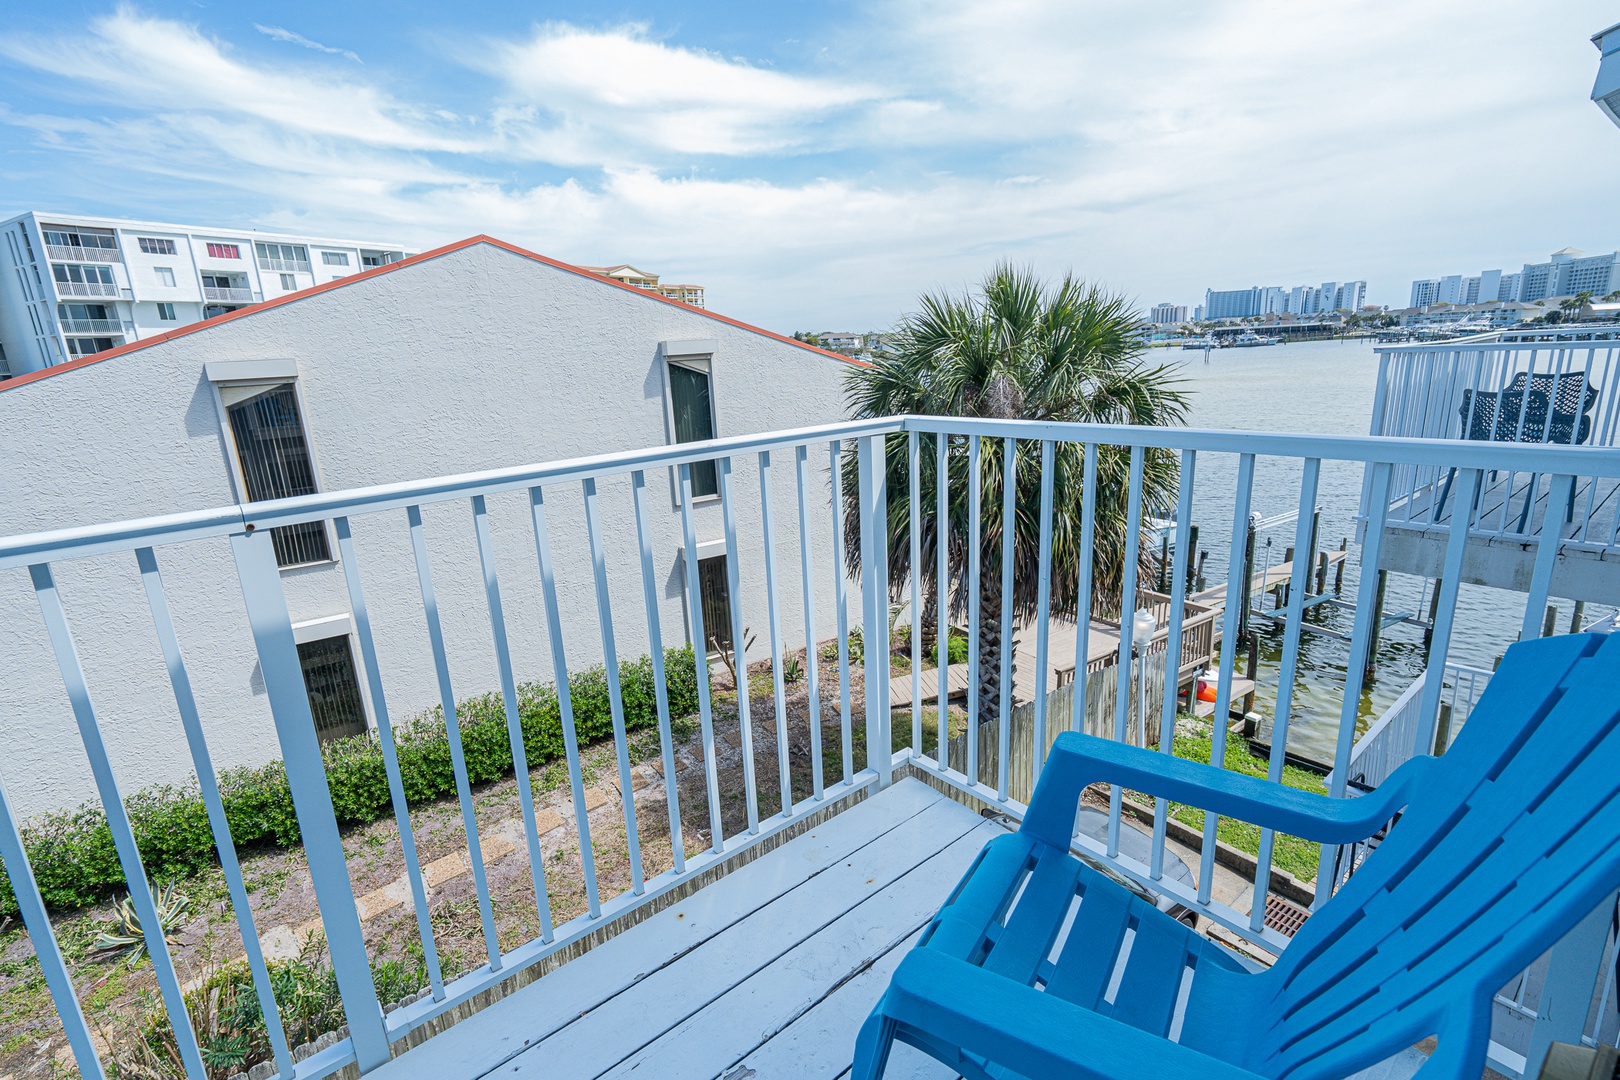 Step out onto the 3rd-floor balcony & take in the fresh air with water views